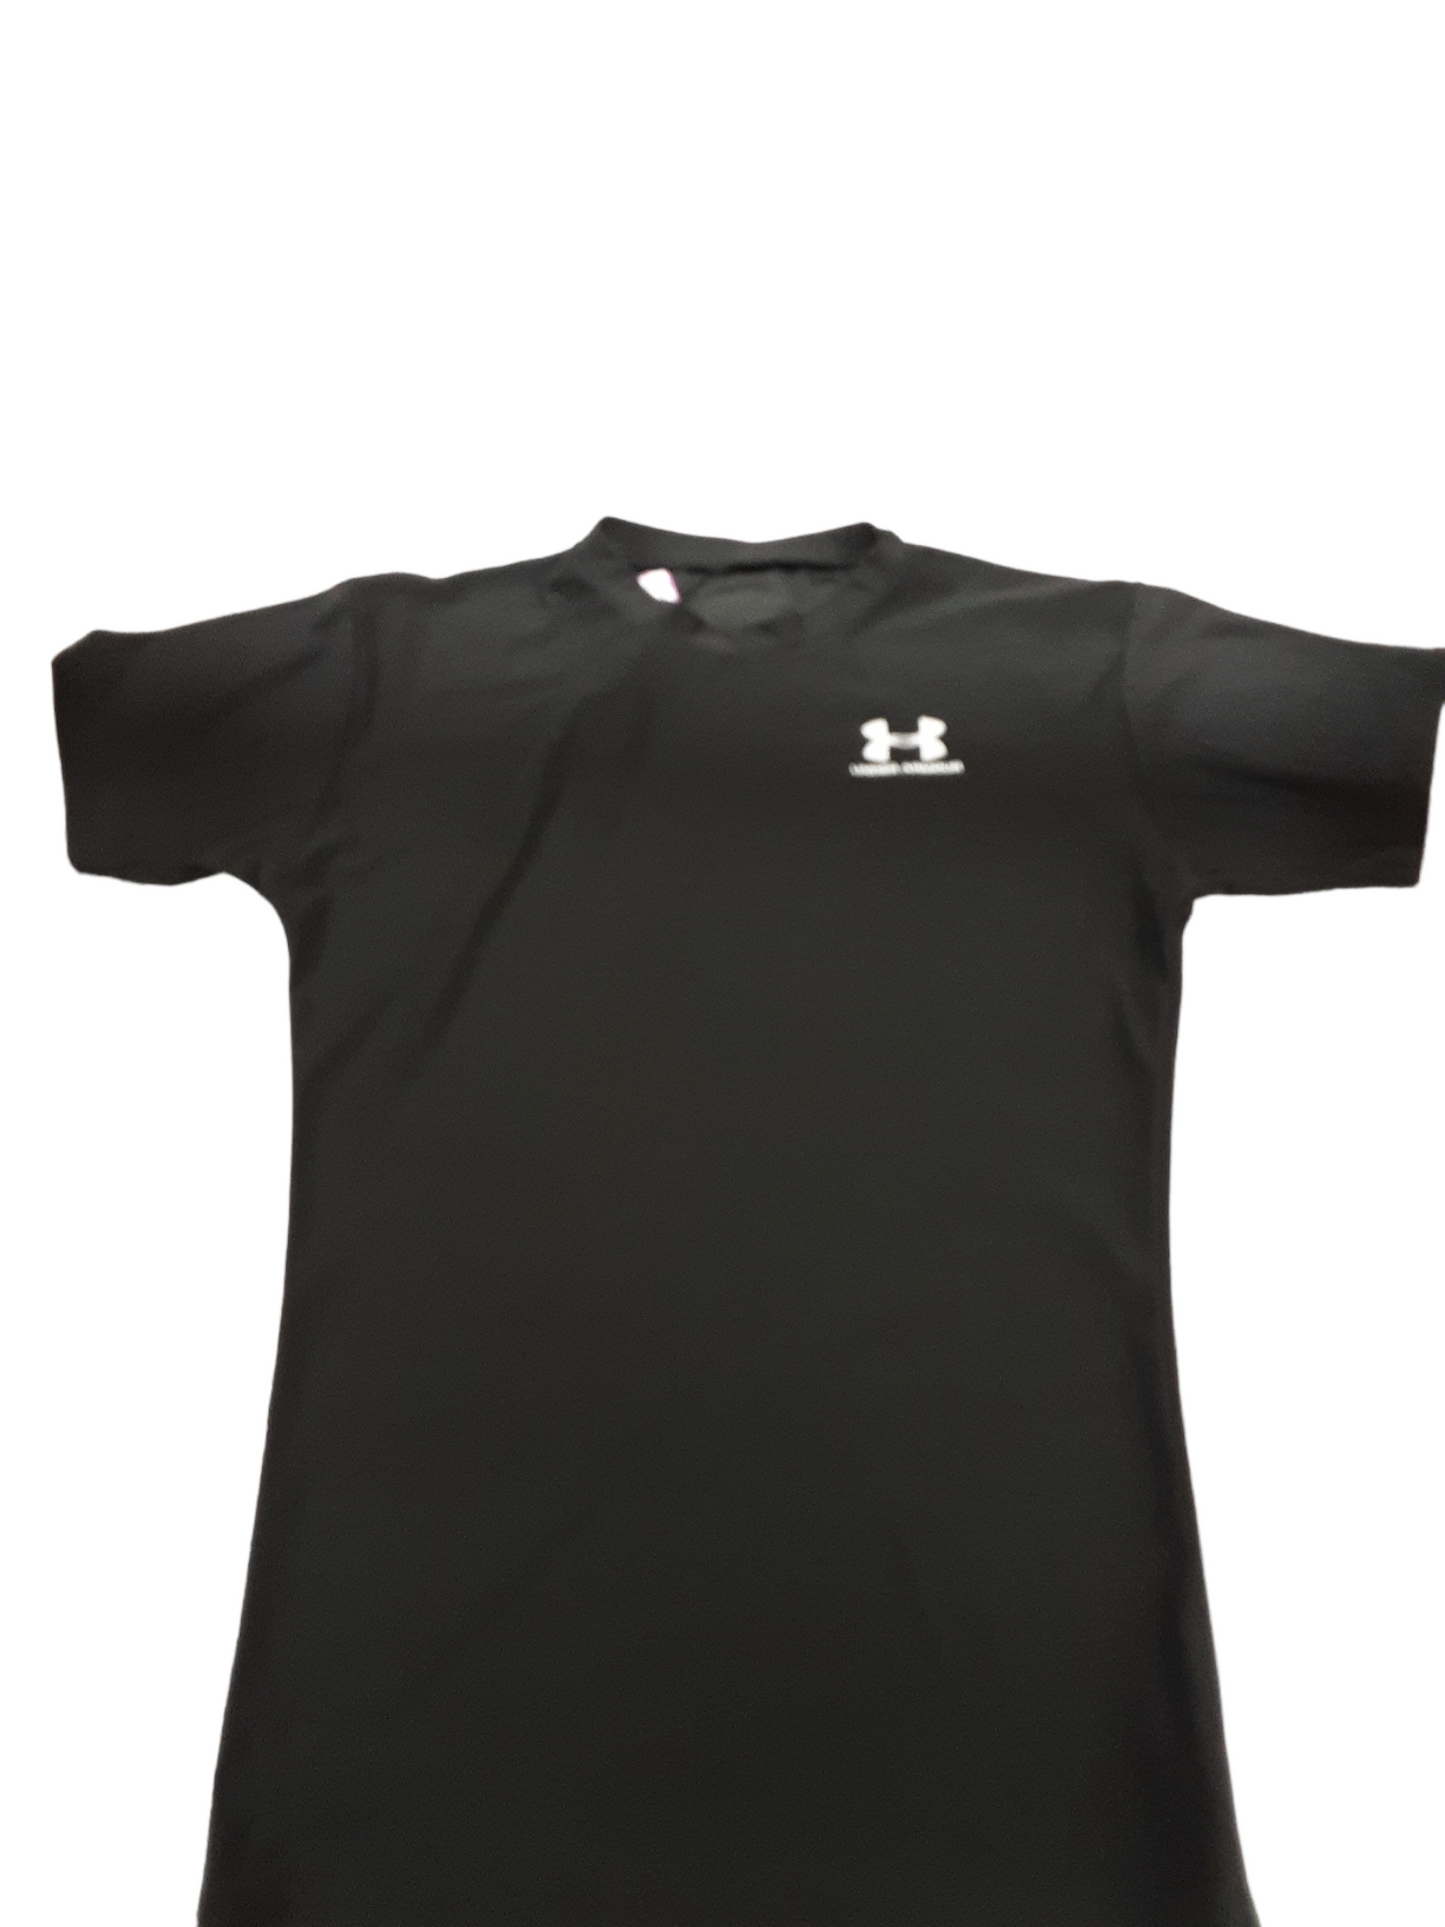 Under Armour top size 14